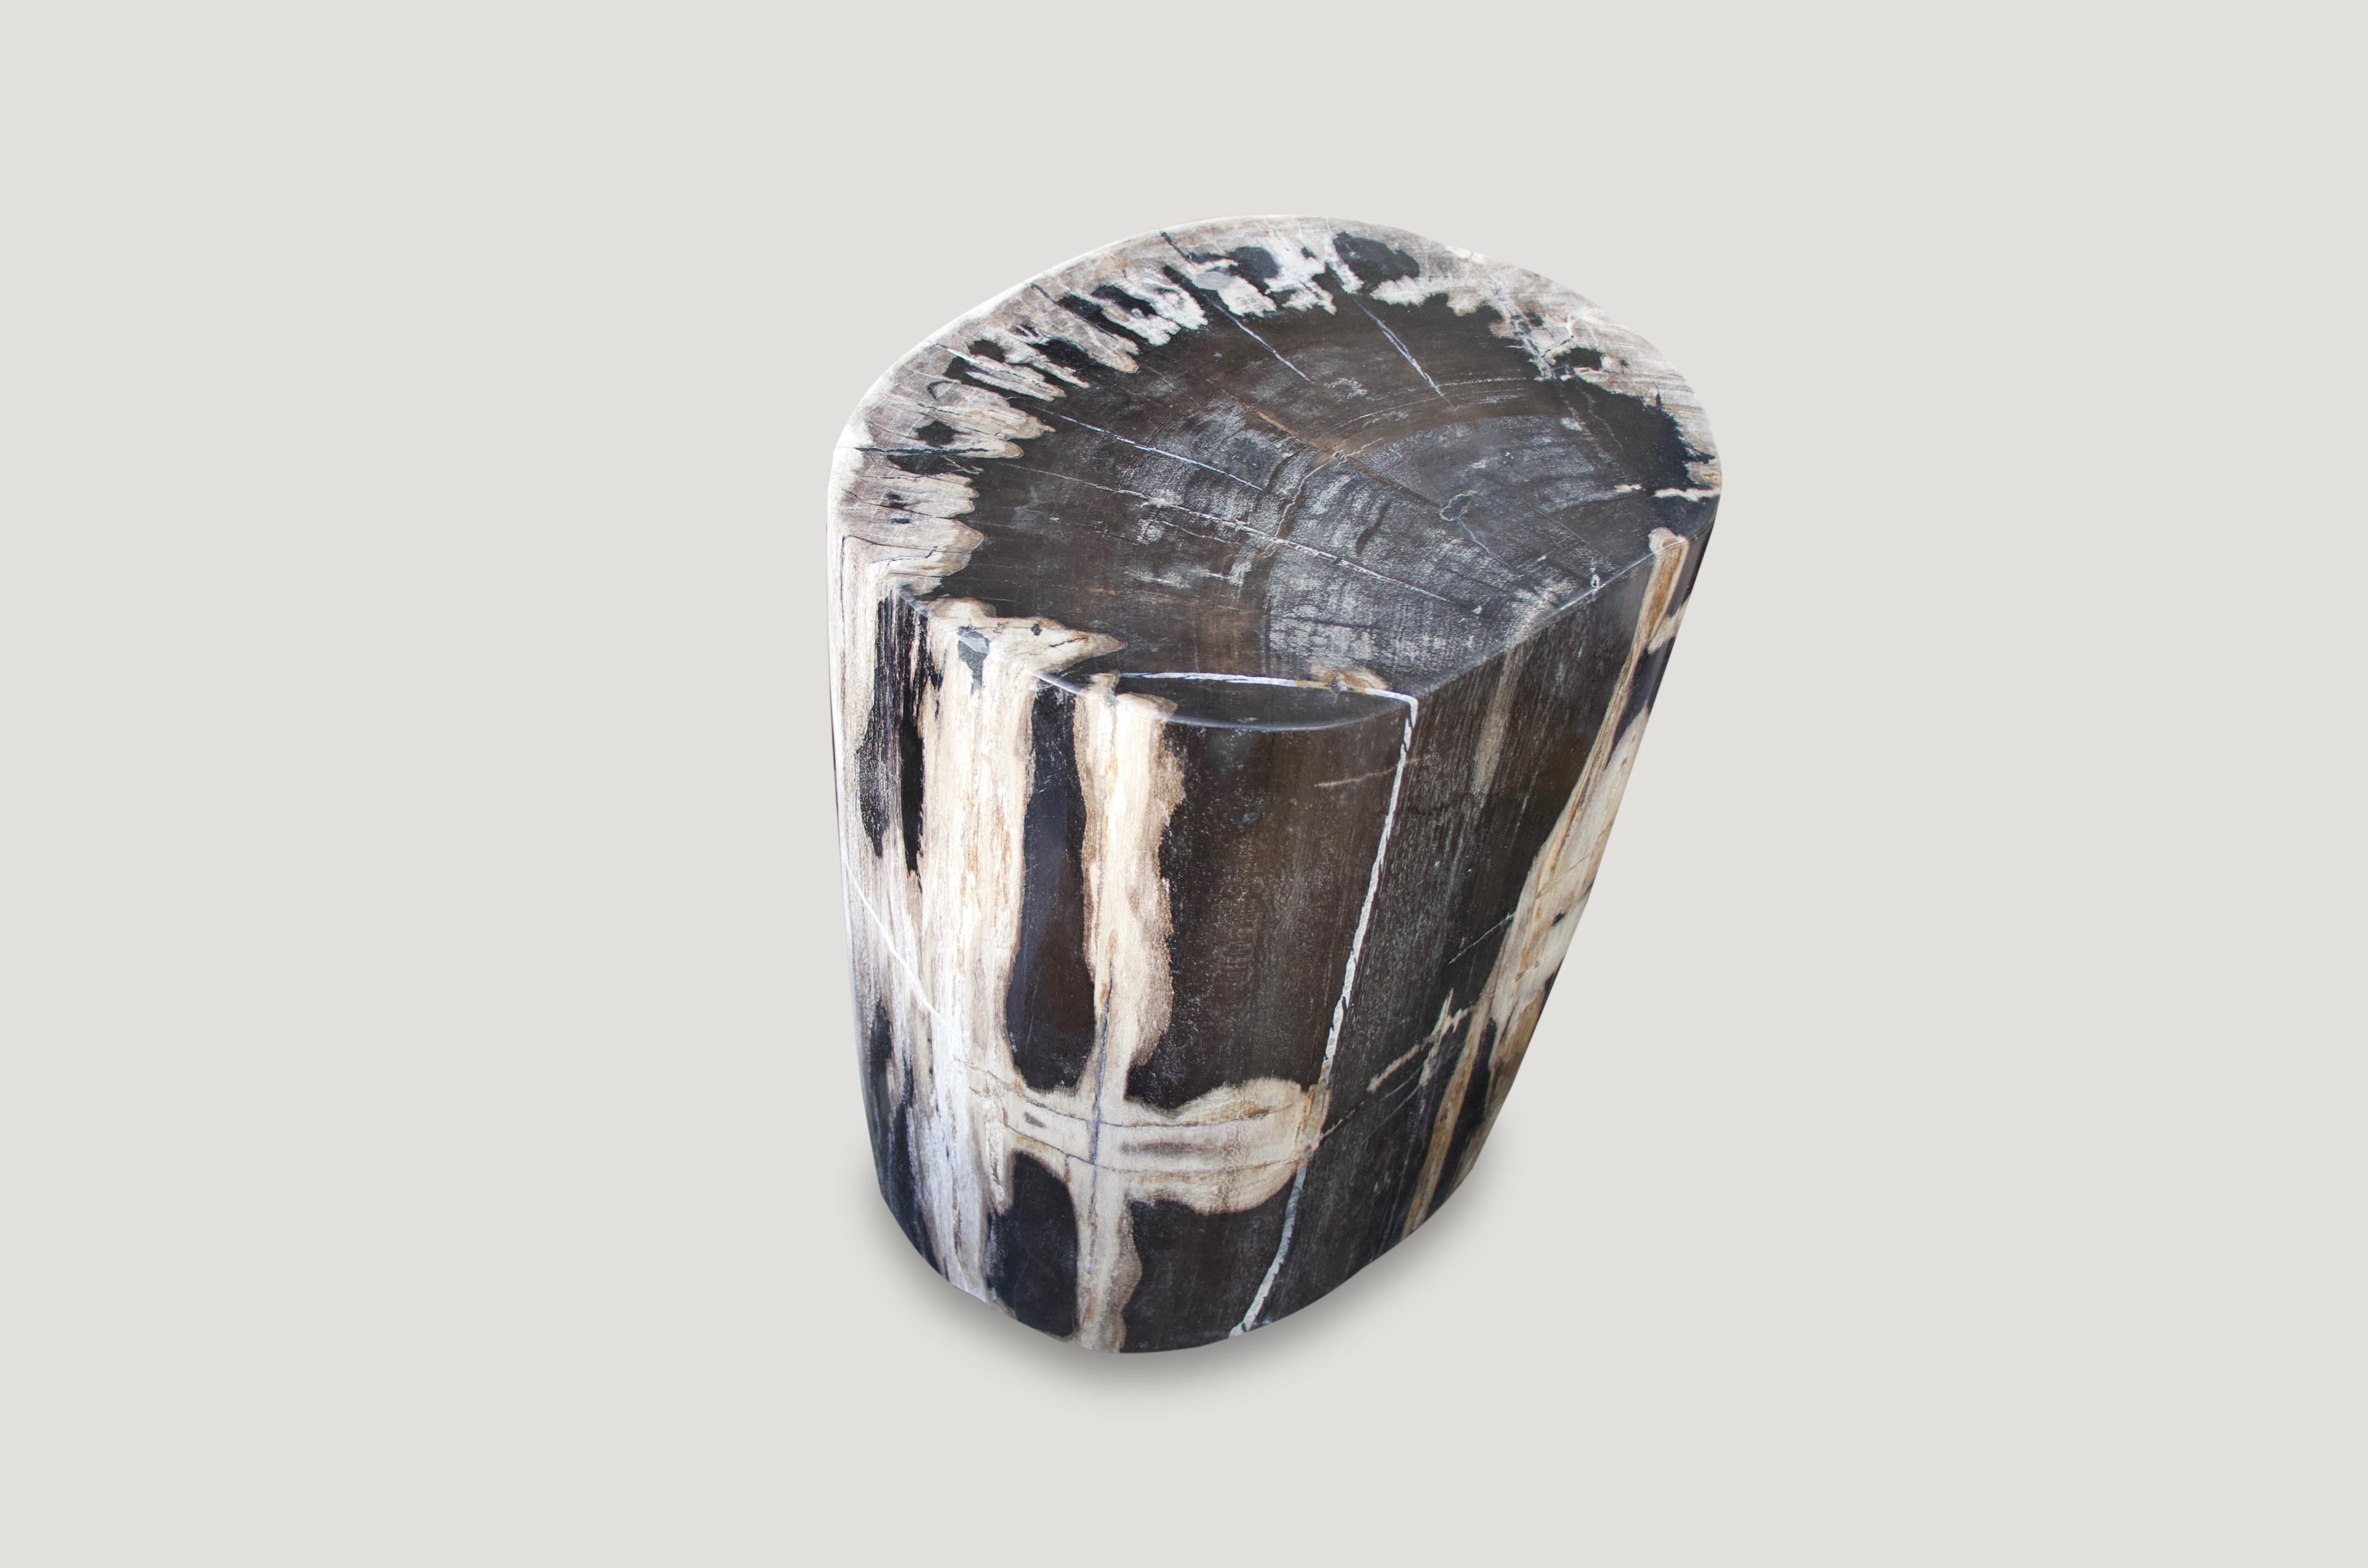 One side is white the other black. Beautiful petrified wood side table. Over 40 million years old, yet so modern.

We source the highest quality petrified wood available. Each piece is hand selected and highly polished with minimal cracks.